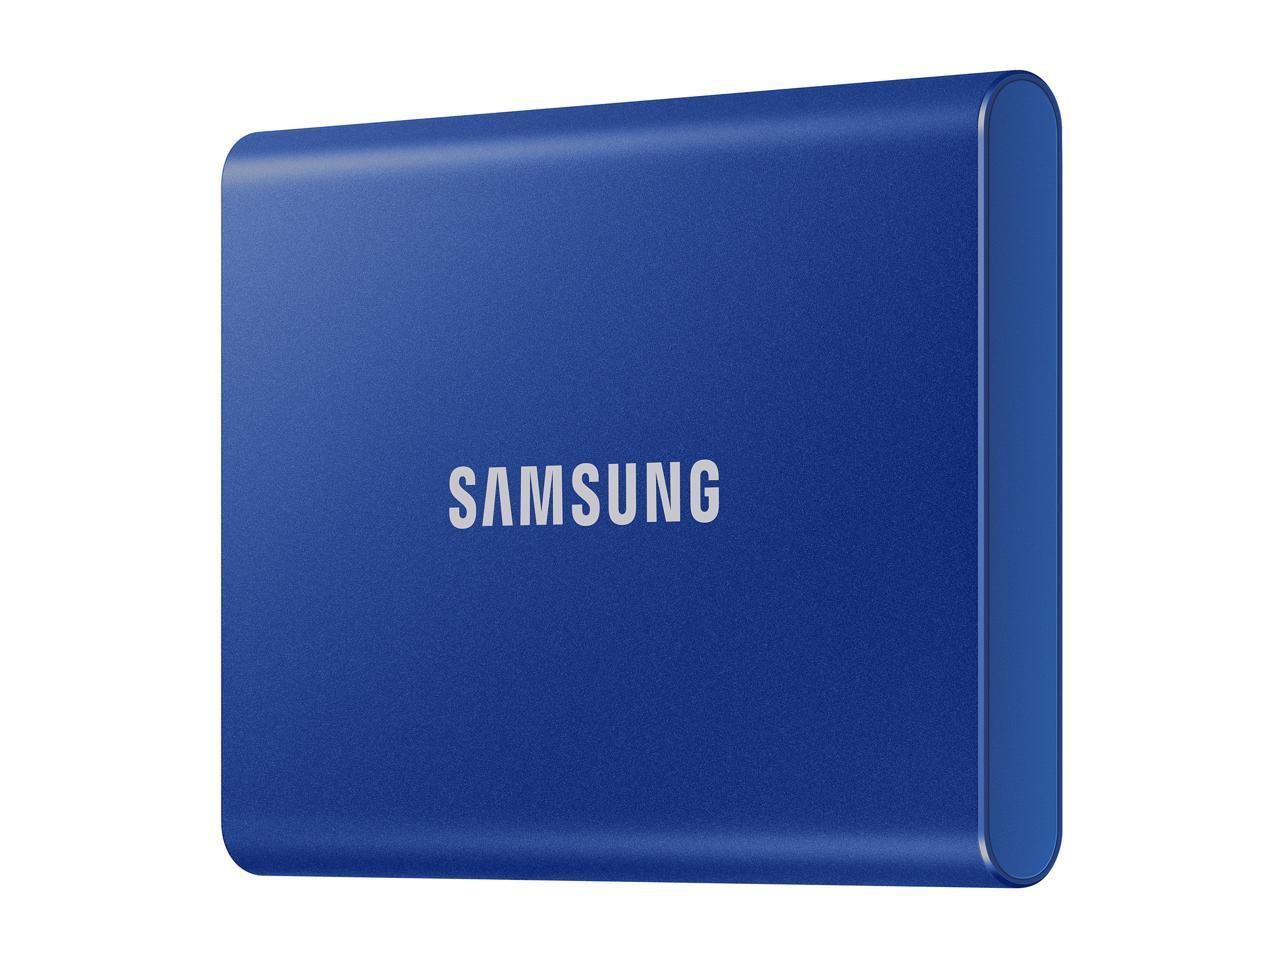 Samsung T7 Portable SSD 1TB USB SSD Solid State Drive for $109.99 Shipped